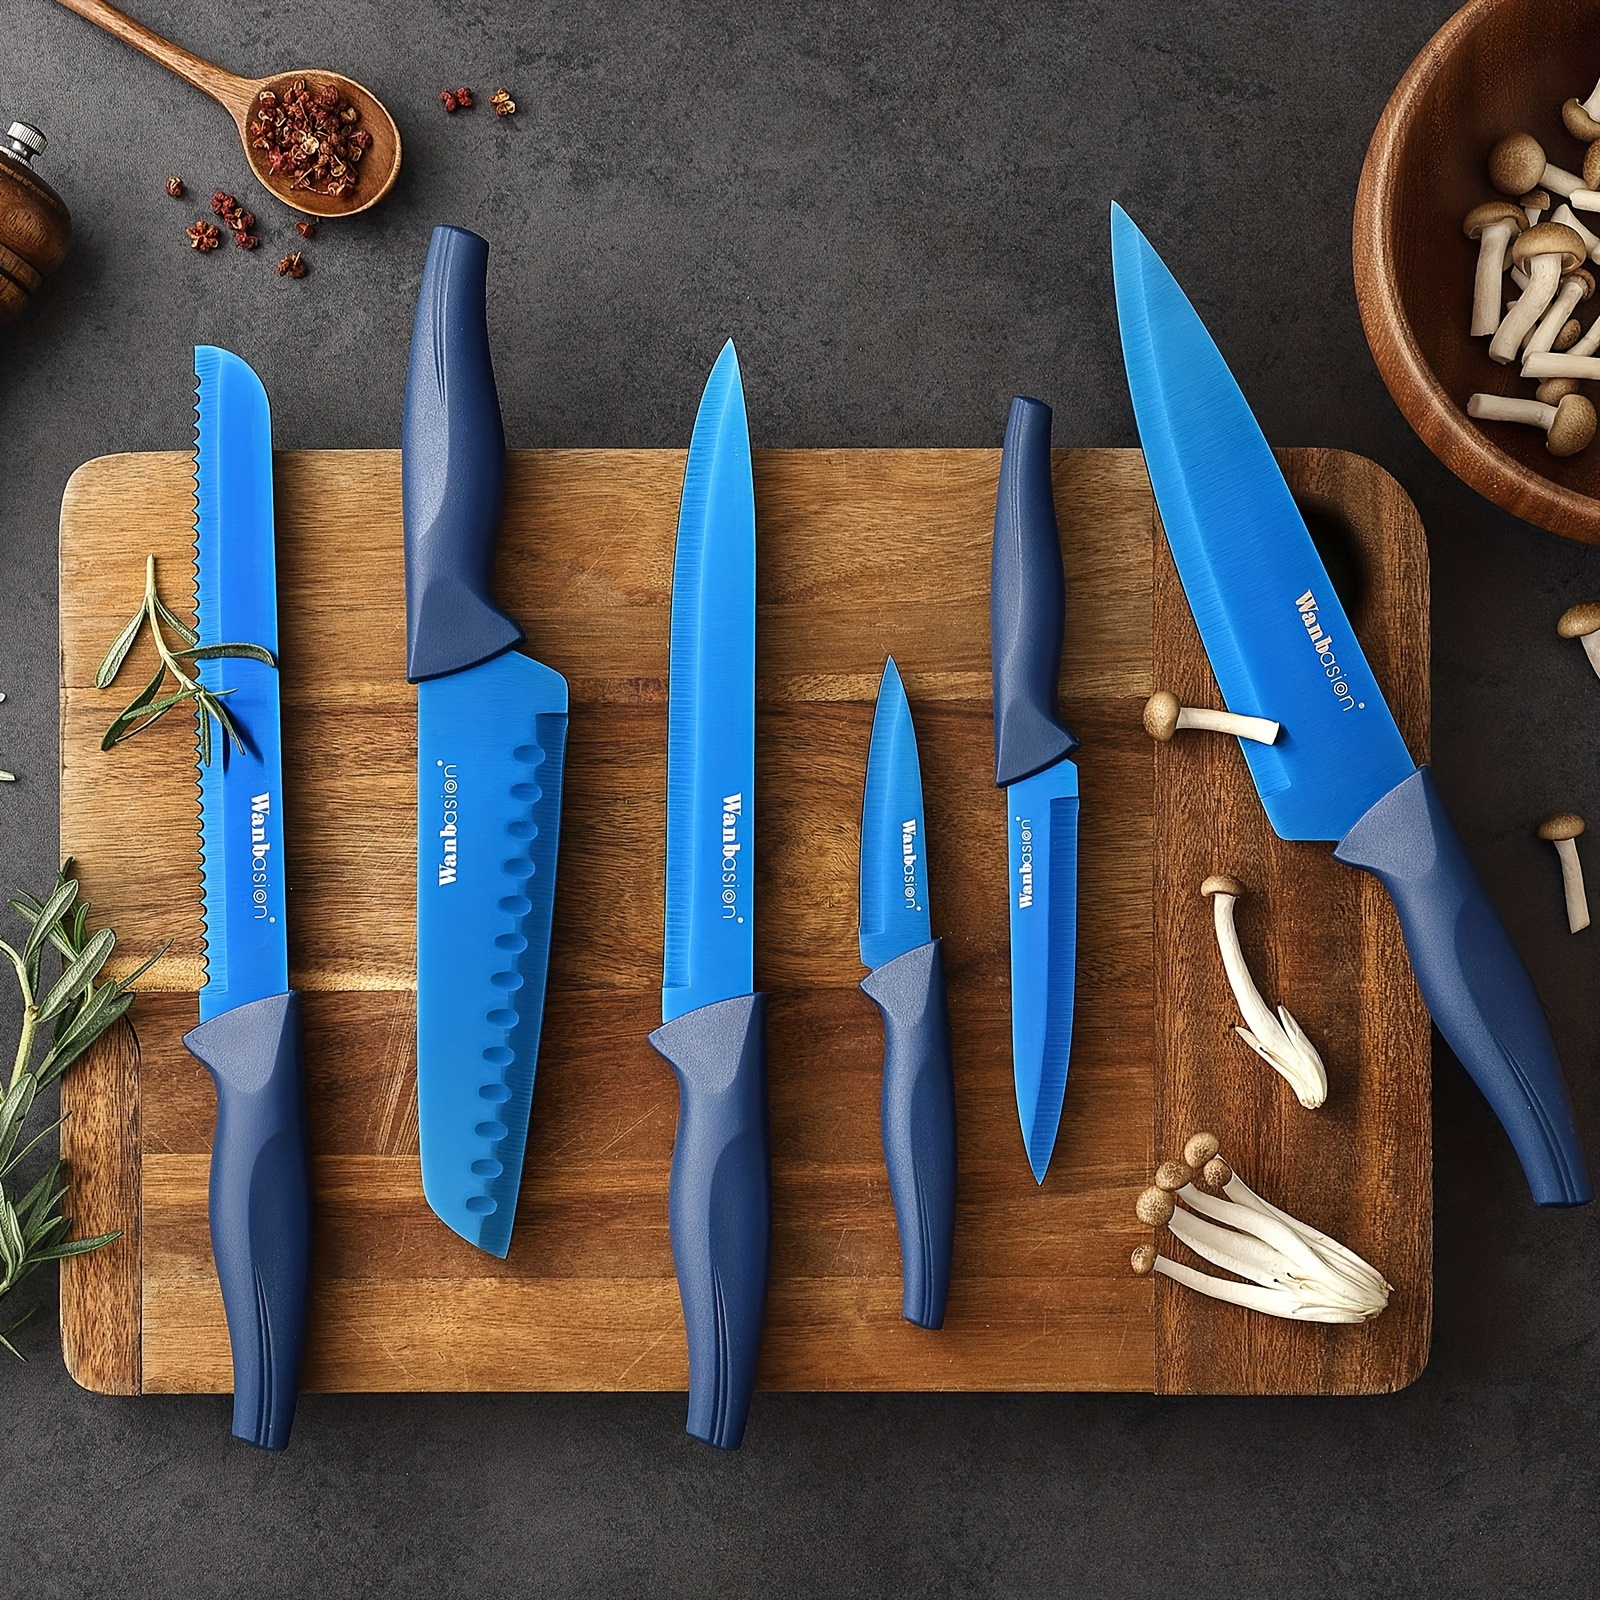 

Blue Professional Kitchen Knife Chef Set, Stainless Steel, Dishwasher Safe With Sheathes